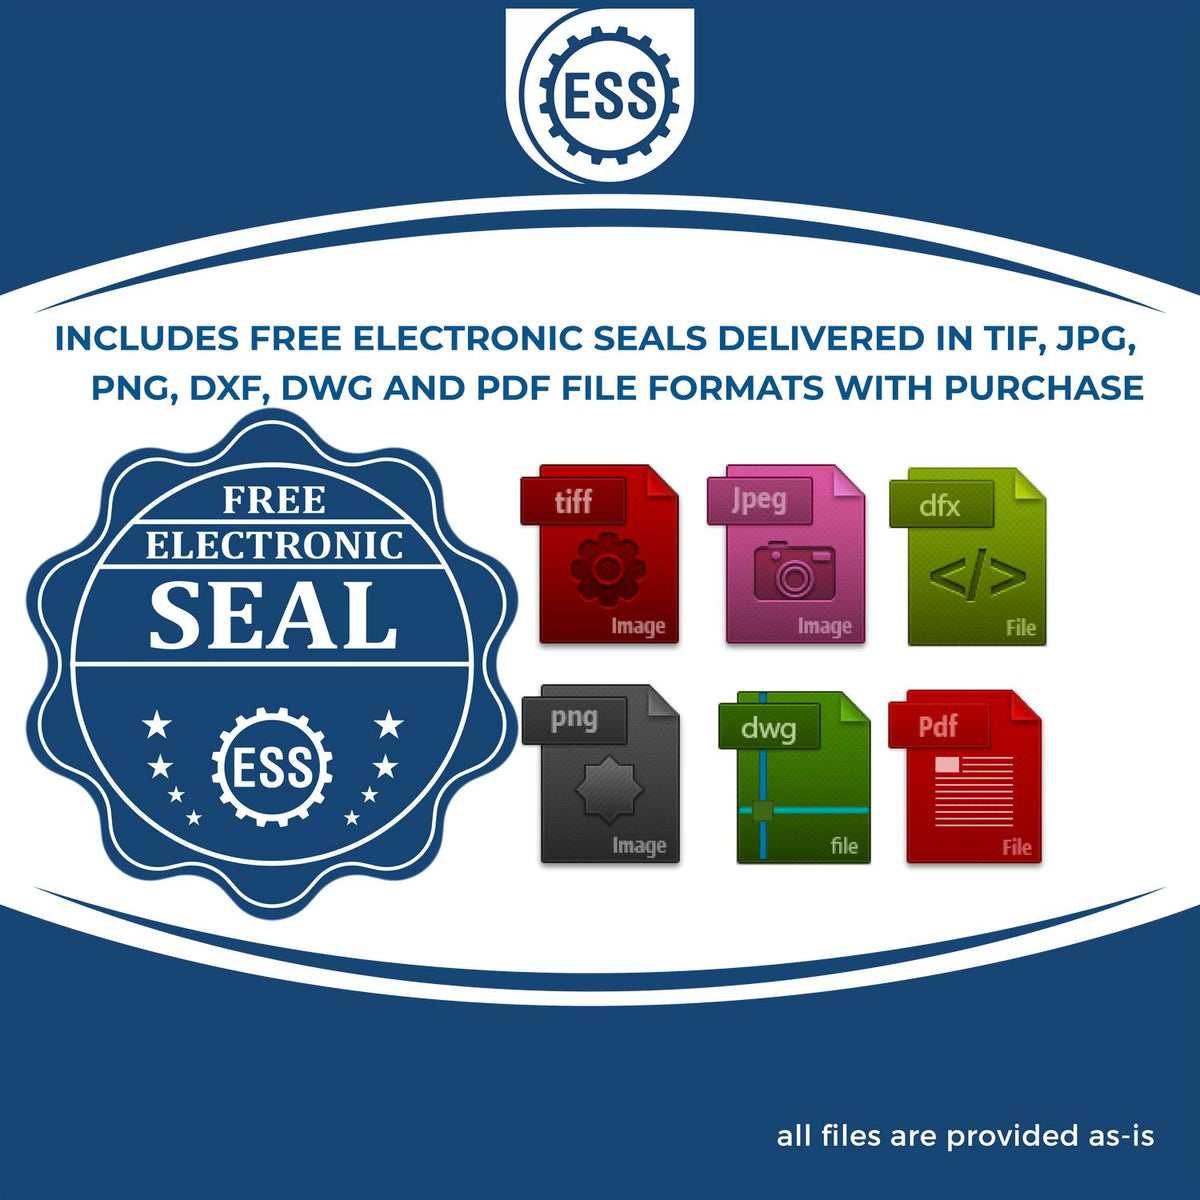 An infographic for the free electronic seal for the Heavy-Duty California Rectangular Notary Stamp illustrating the different file type icons such as DXF, DWG, TIF, JPG and PNG.